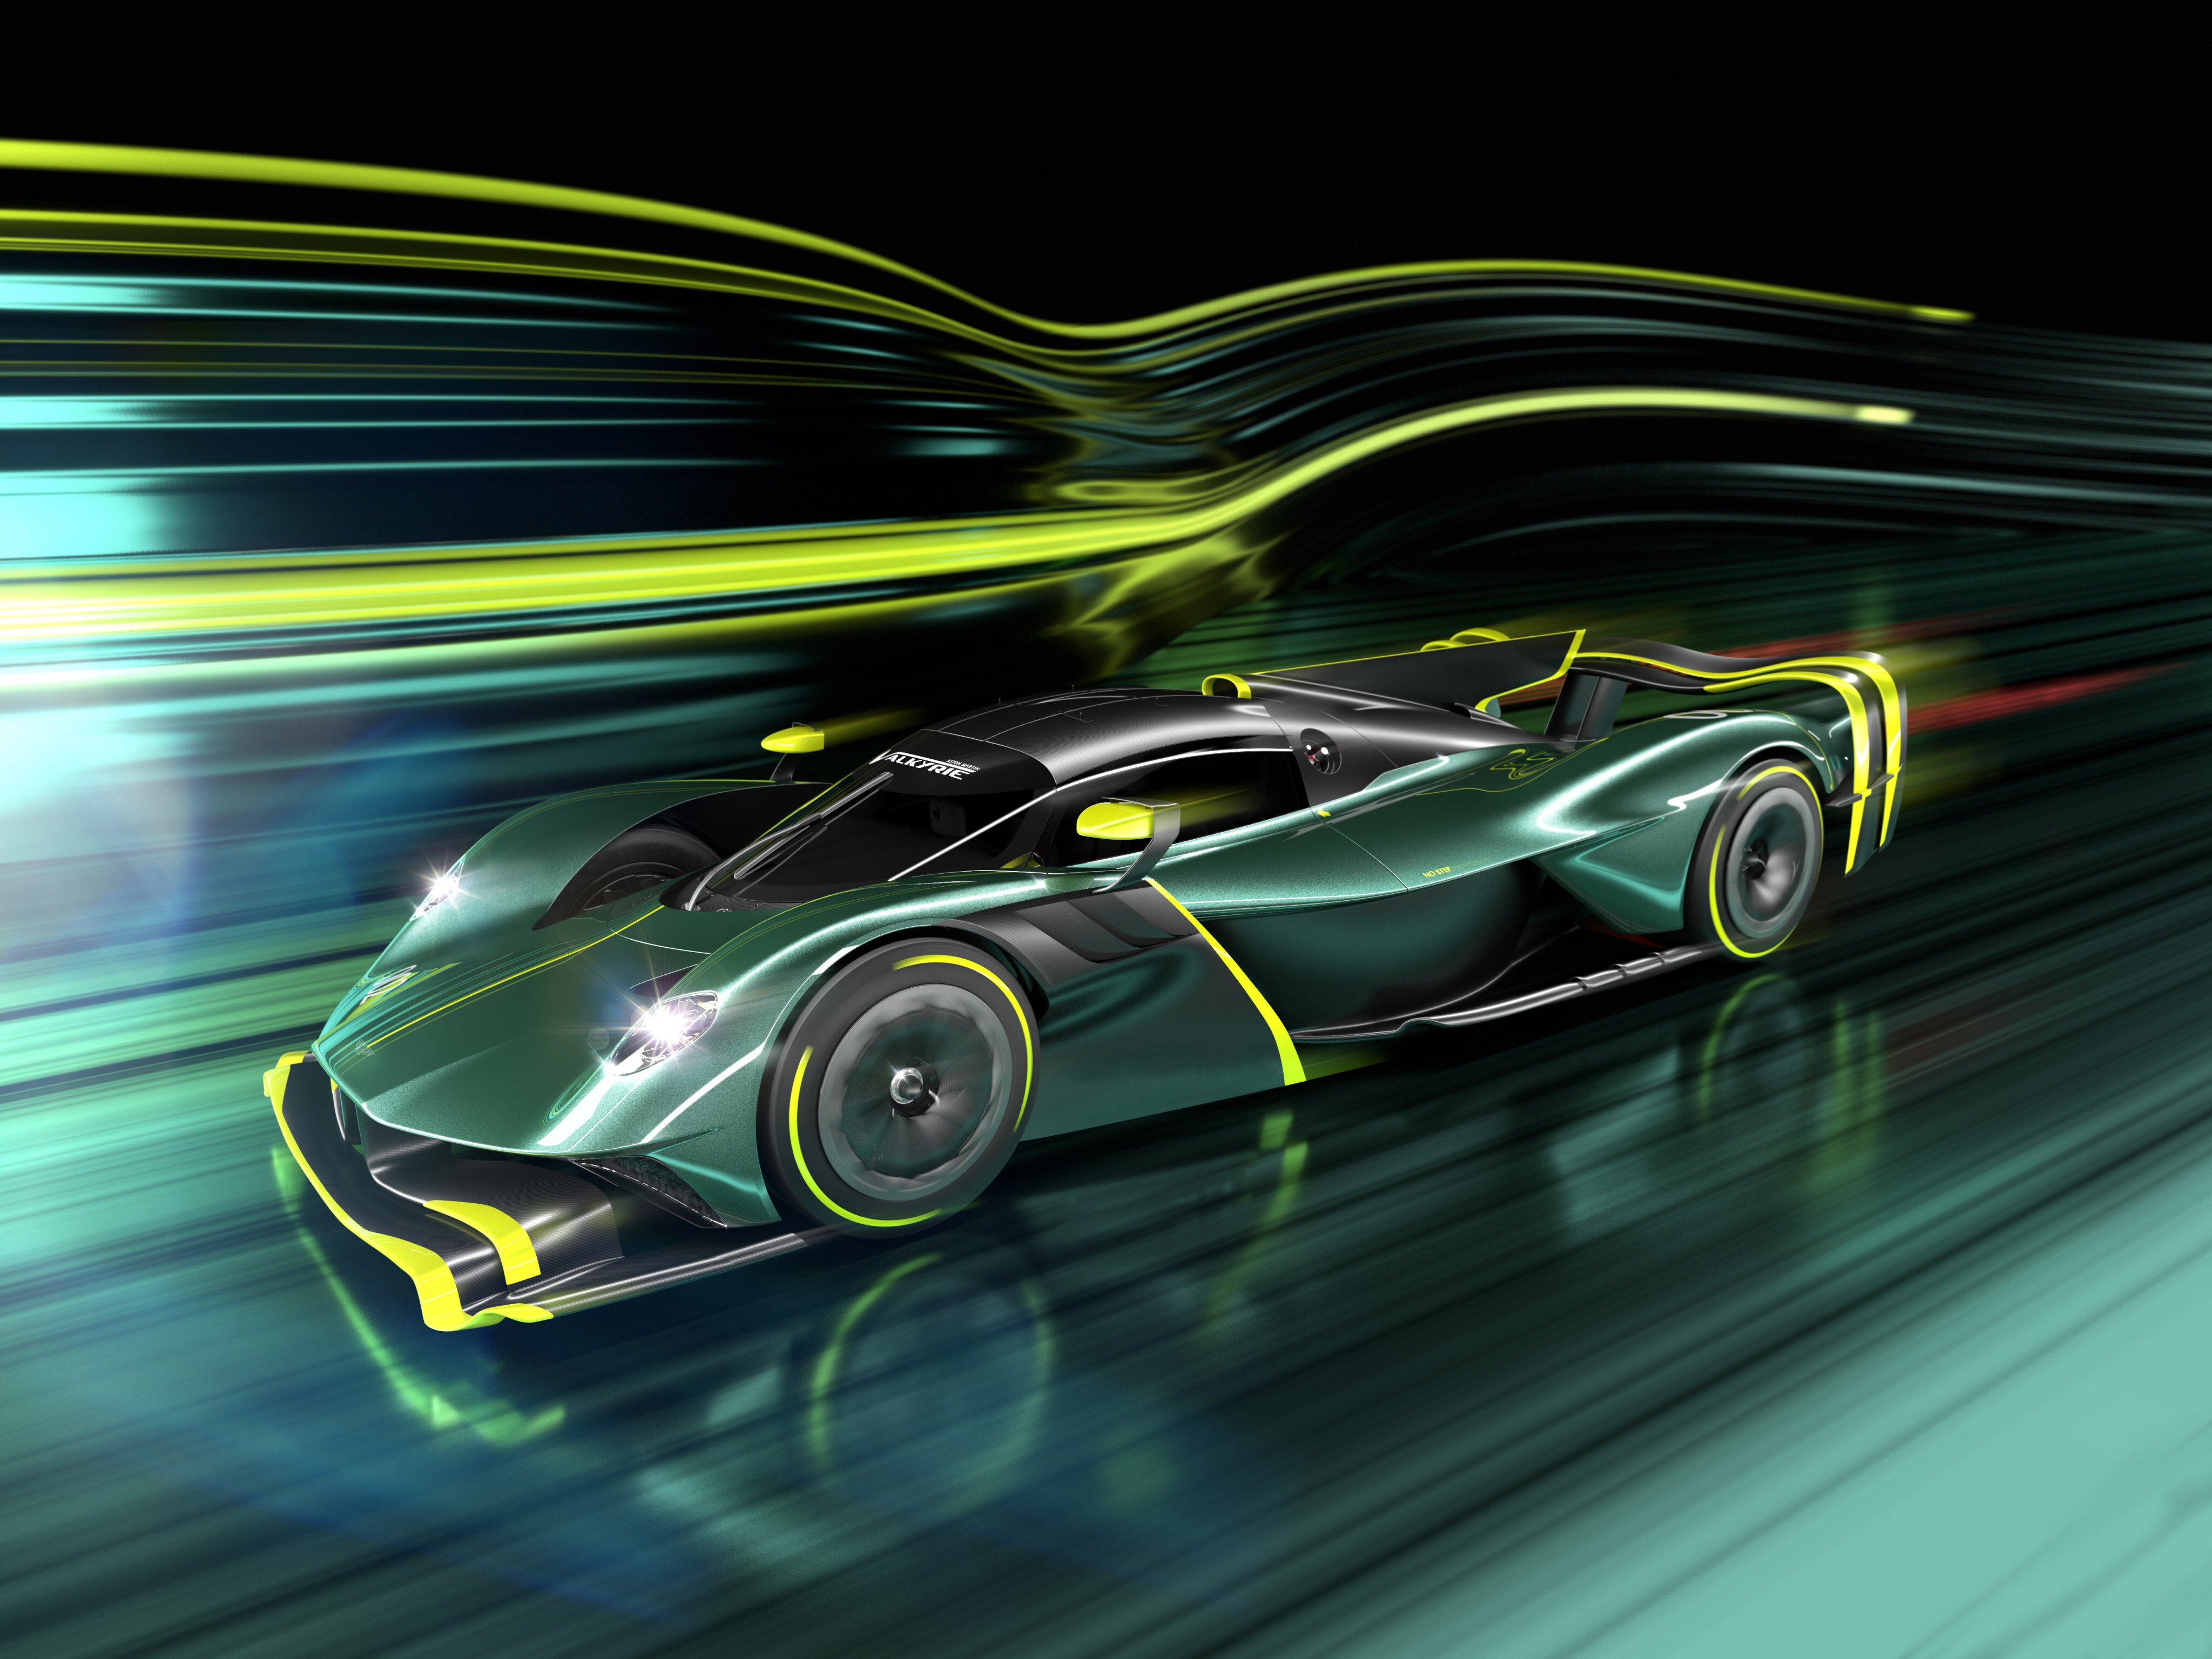 The Aston Martin AMR Pro was conceived to win the iconic 24 Hours of Le Mans race in the new Hypercar class. Photos: Aston Martin